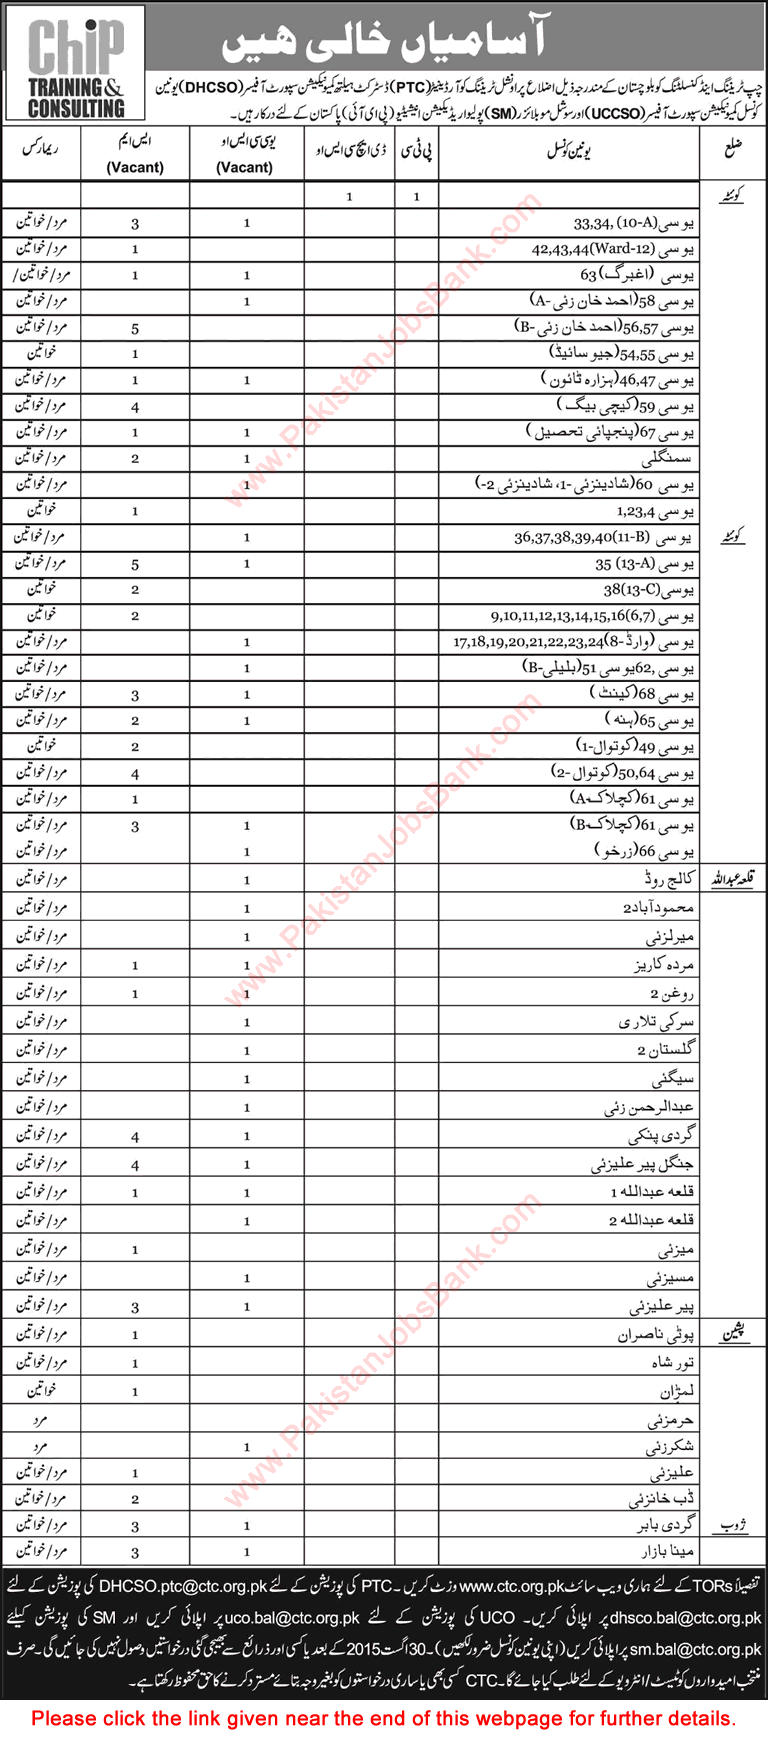 Chip Training and Consulting Balochistan Jobs 2015 August Polio Eradication Initiative Pakistan